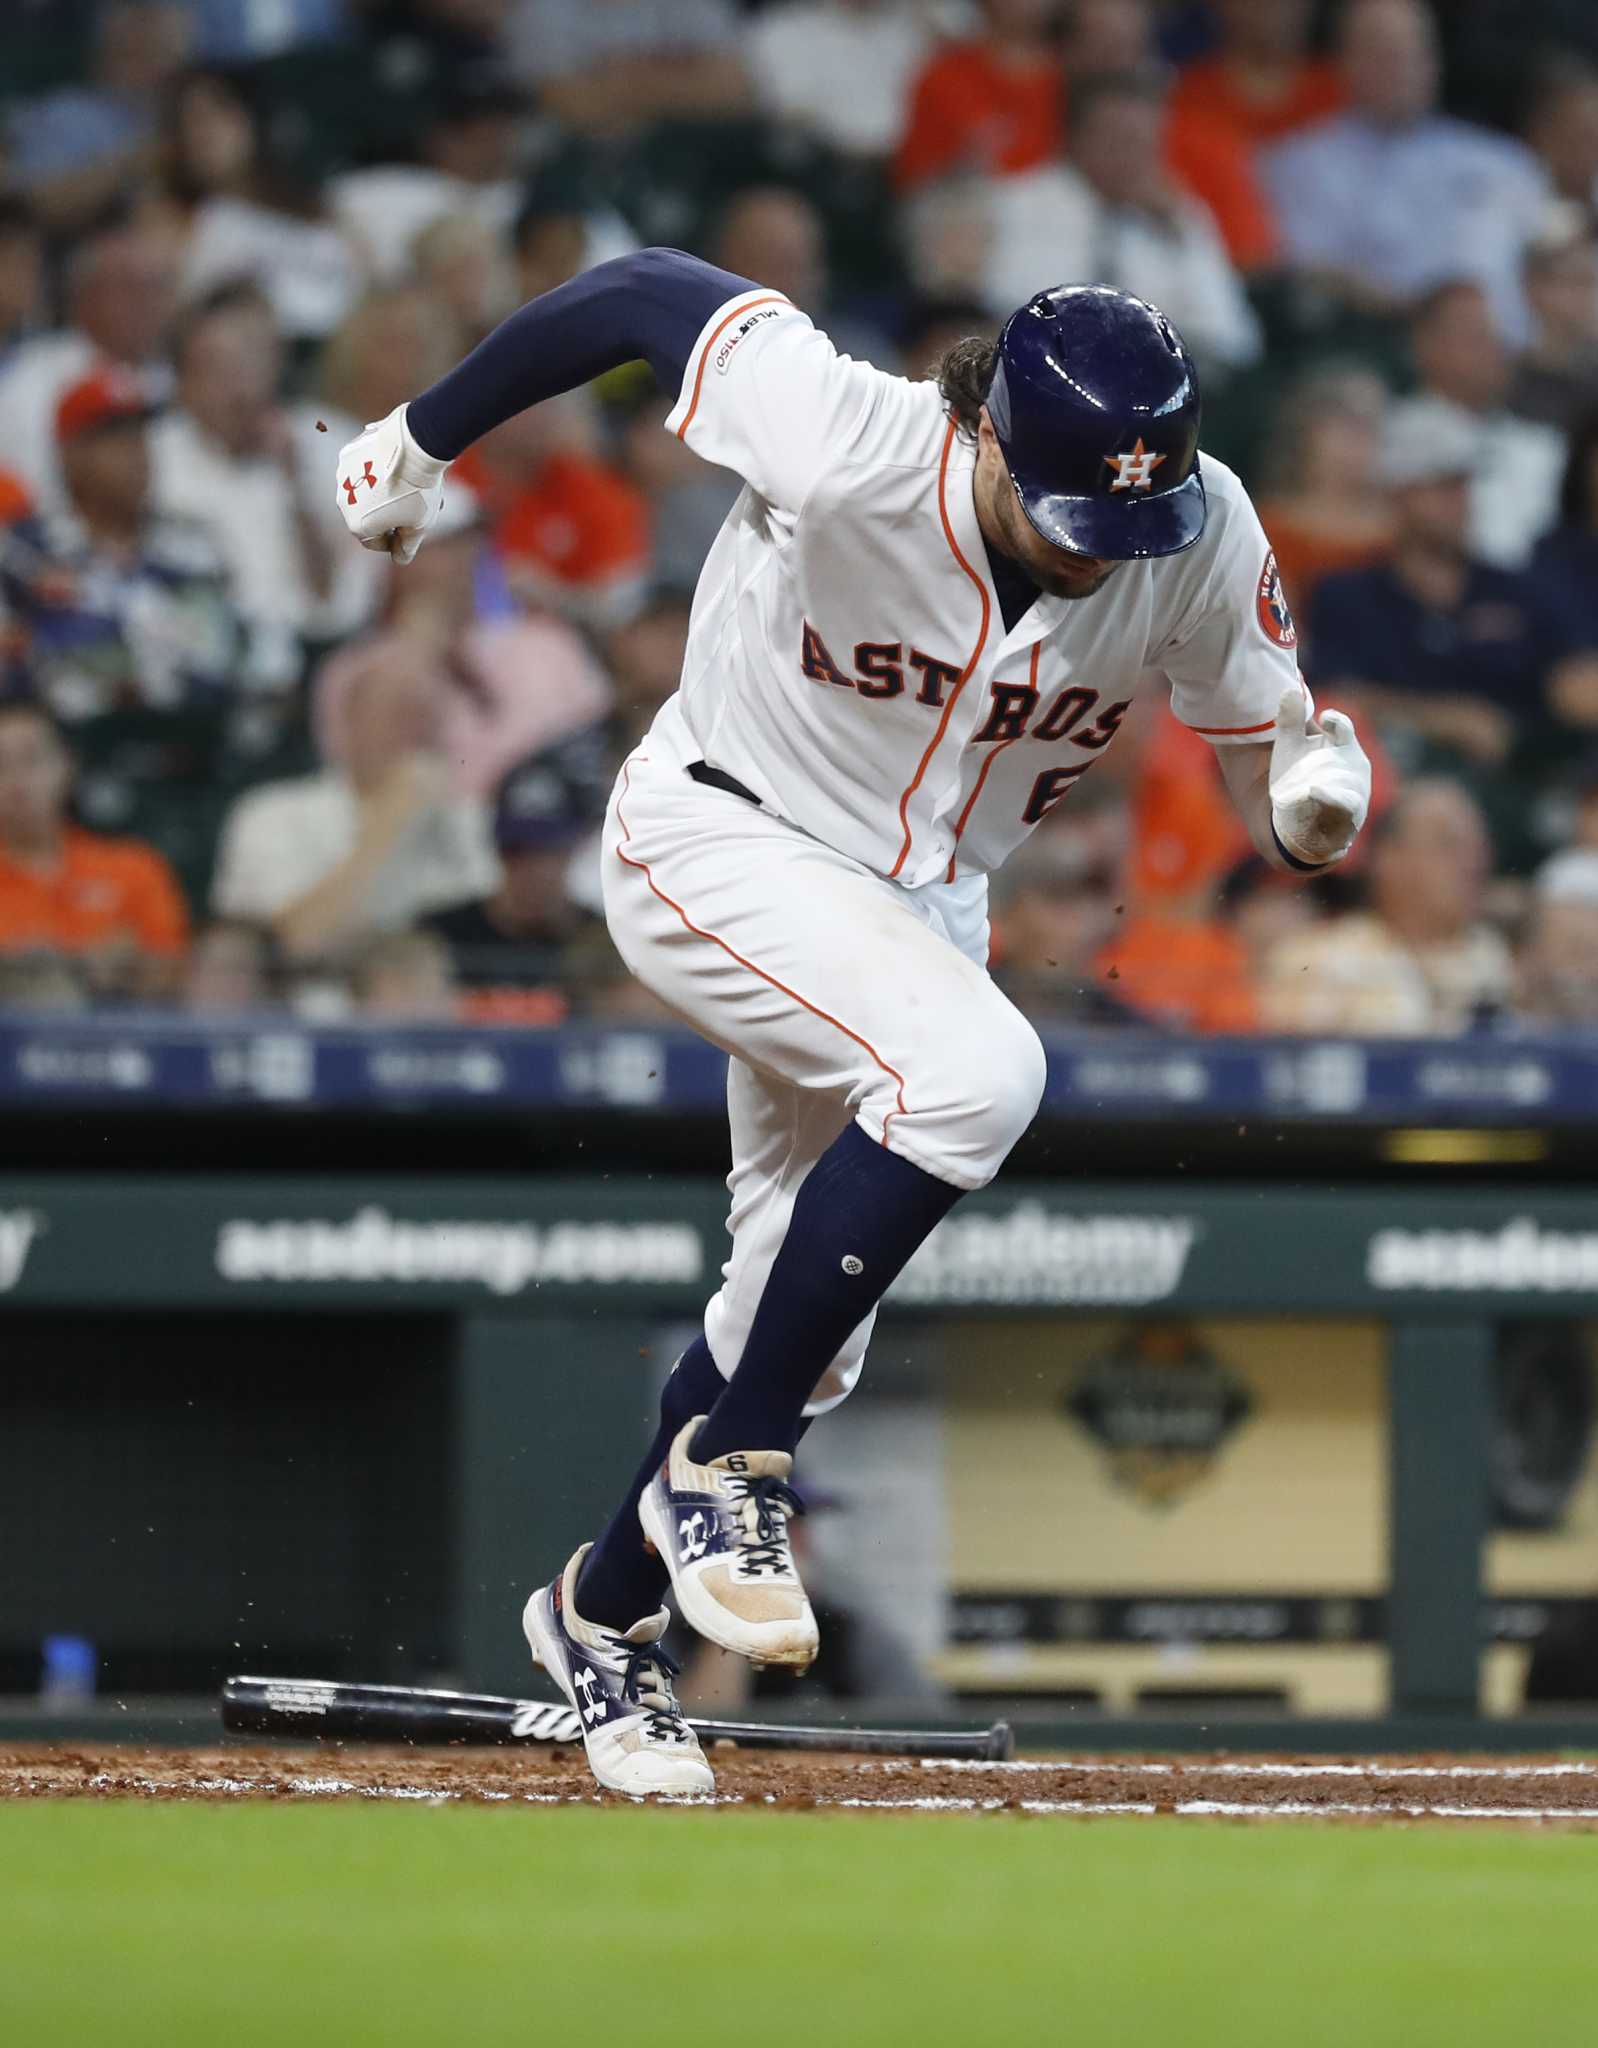 A crazy eight: Yuli Gurriel ties team RBI record as Astros rout Rockies